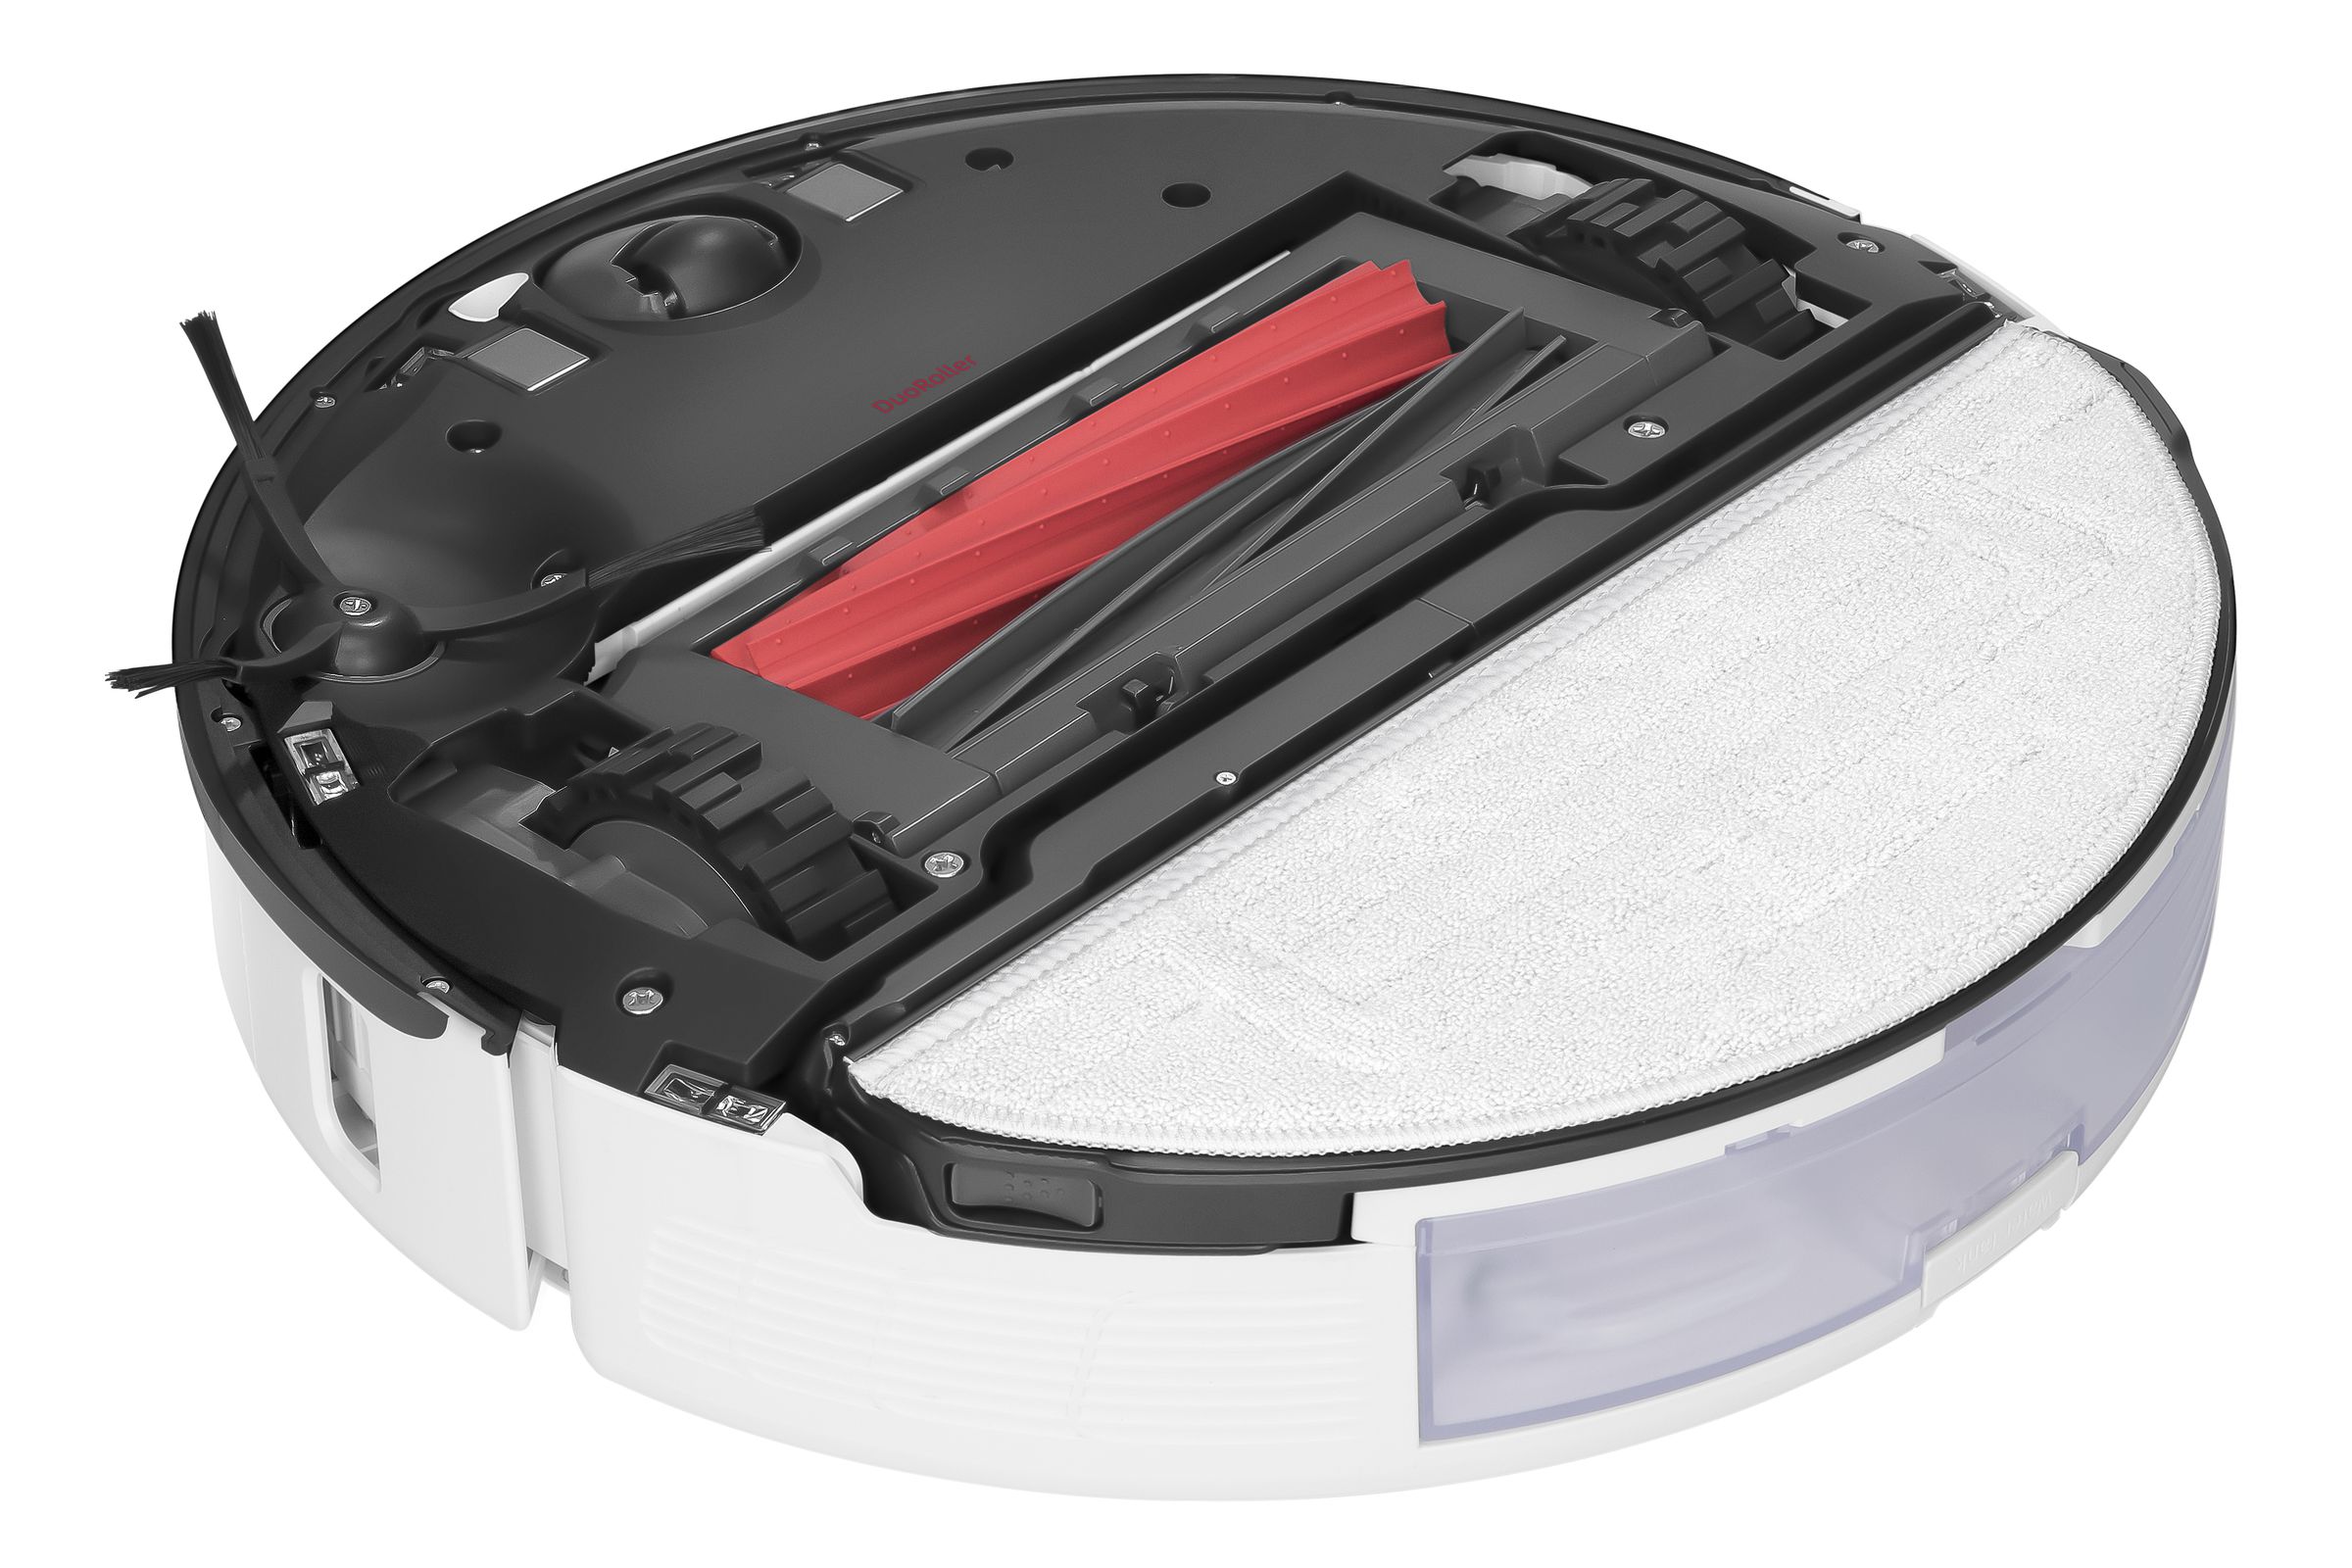 Roborock Announces Expansion Into Target with Its Innovative S7 Max Ultra